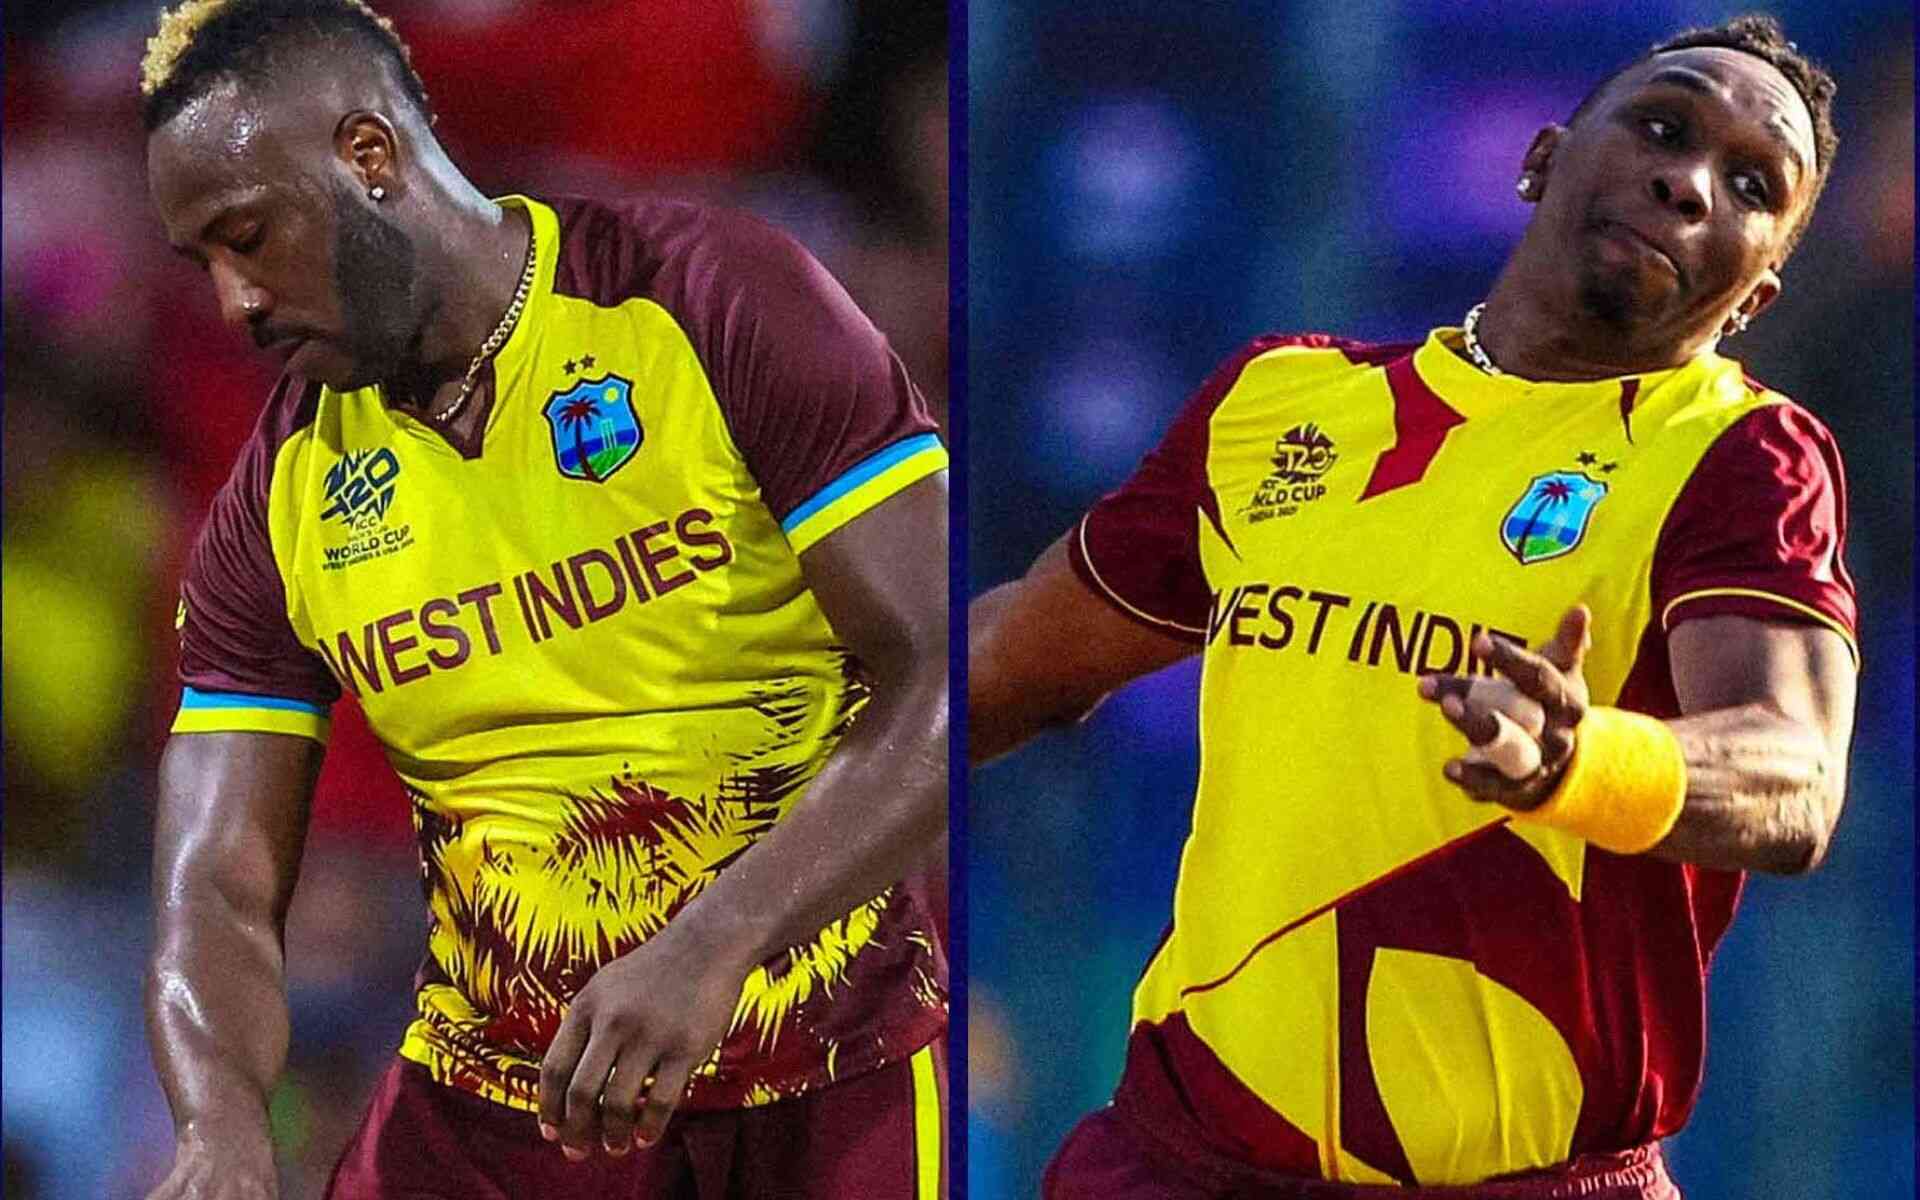 Andre Russell and Dwayne Bravo for WI (X.com)